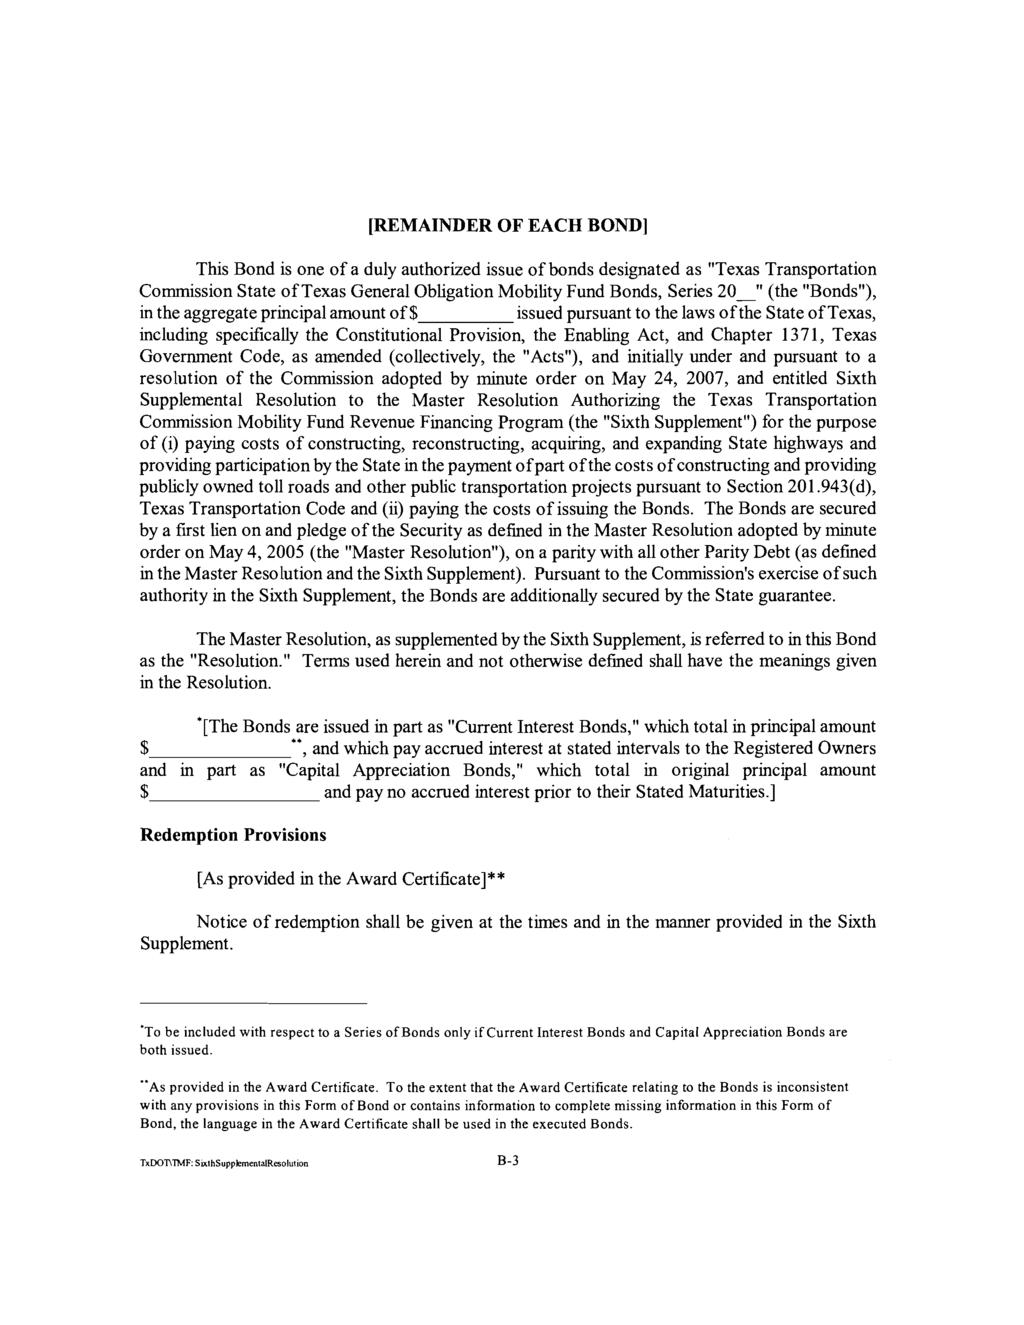 [REMAINDER OF EACH BOND] This Bond is one of a duly authorized issue of bonds designated as "Texas Transportation Commission State of Texas General Obligation Mobility Fund Bonds, Series 20-" (the